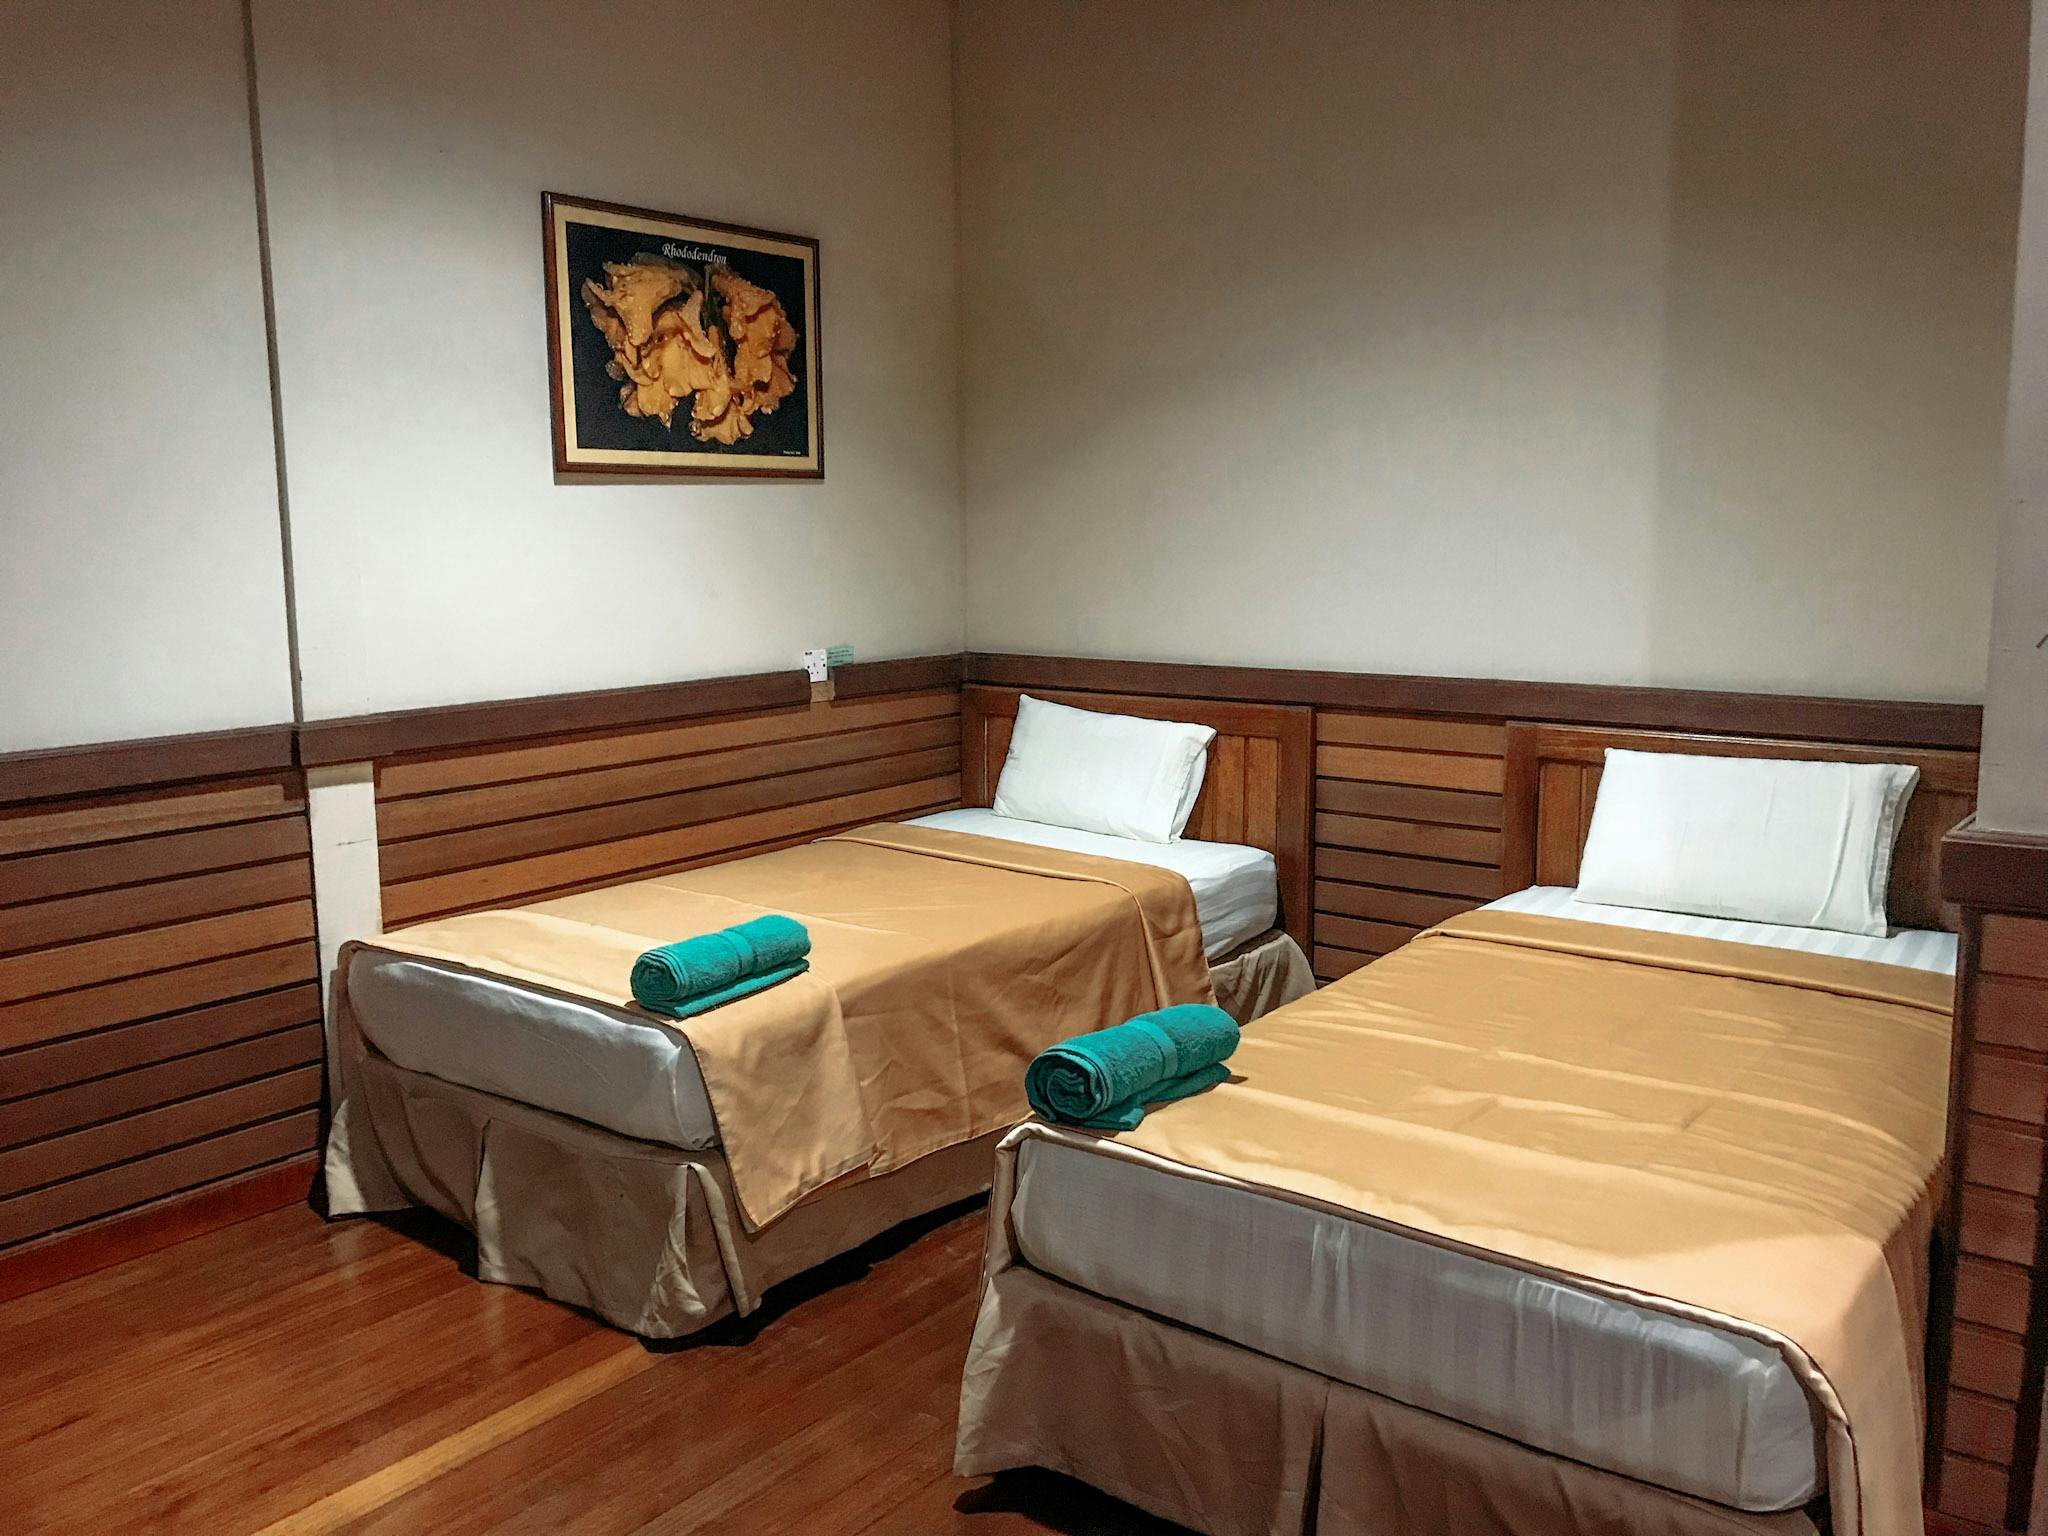 At Maliau Basin Studies Centre you can choose comfortable private rooms like these 